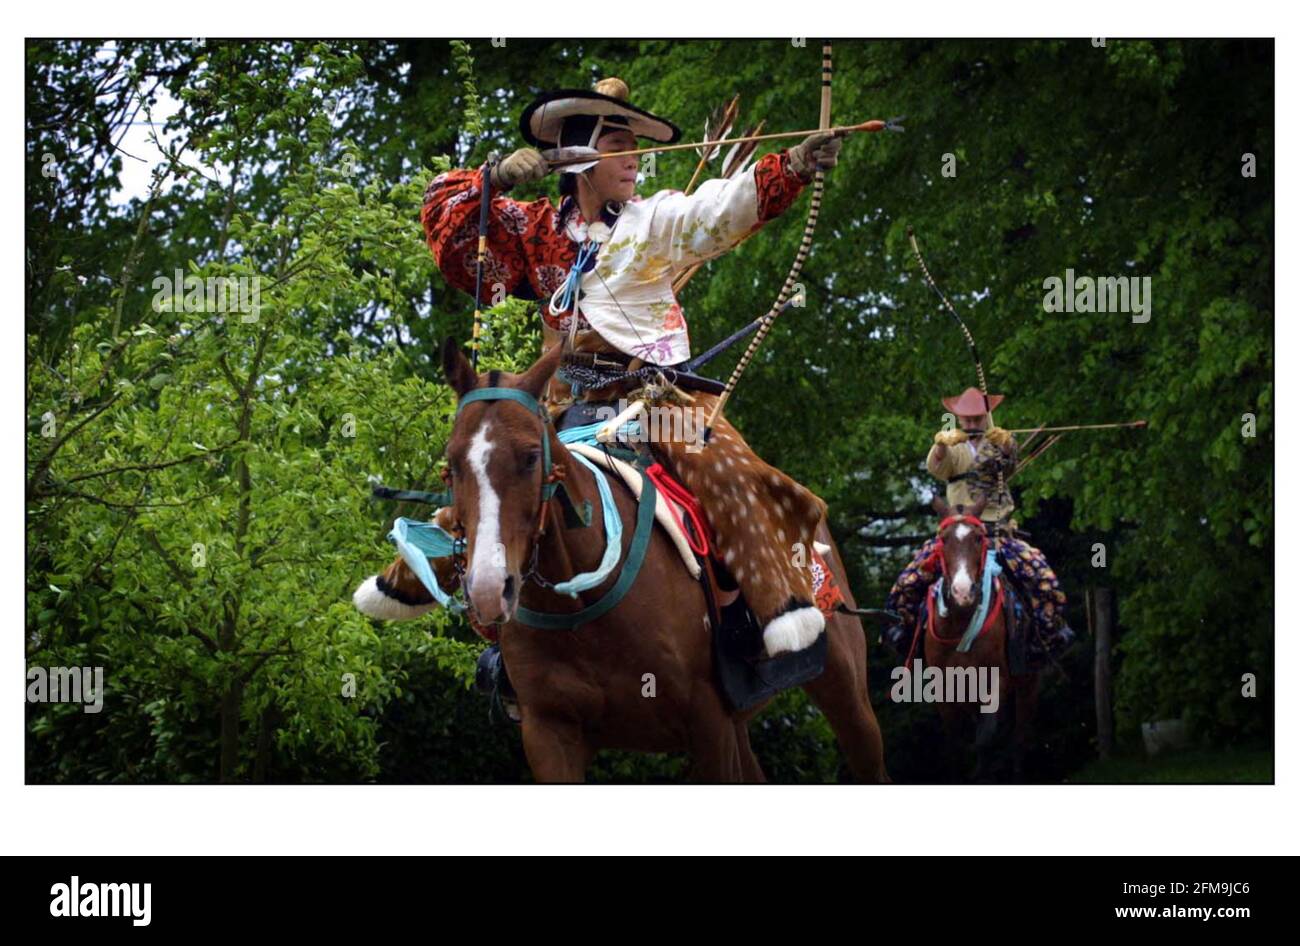 Members of the OGASAWARA school May 2001 of traditional horseback archery practice 'Yabusame' for a display at Japan 2001 Matsuri in Hyde Park this weekend. Stock Photo